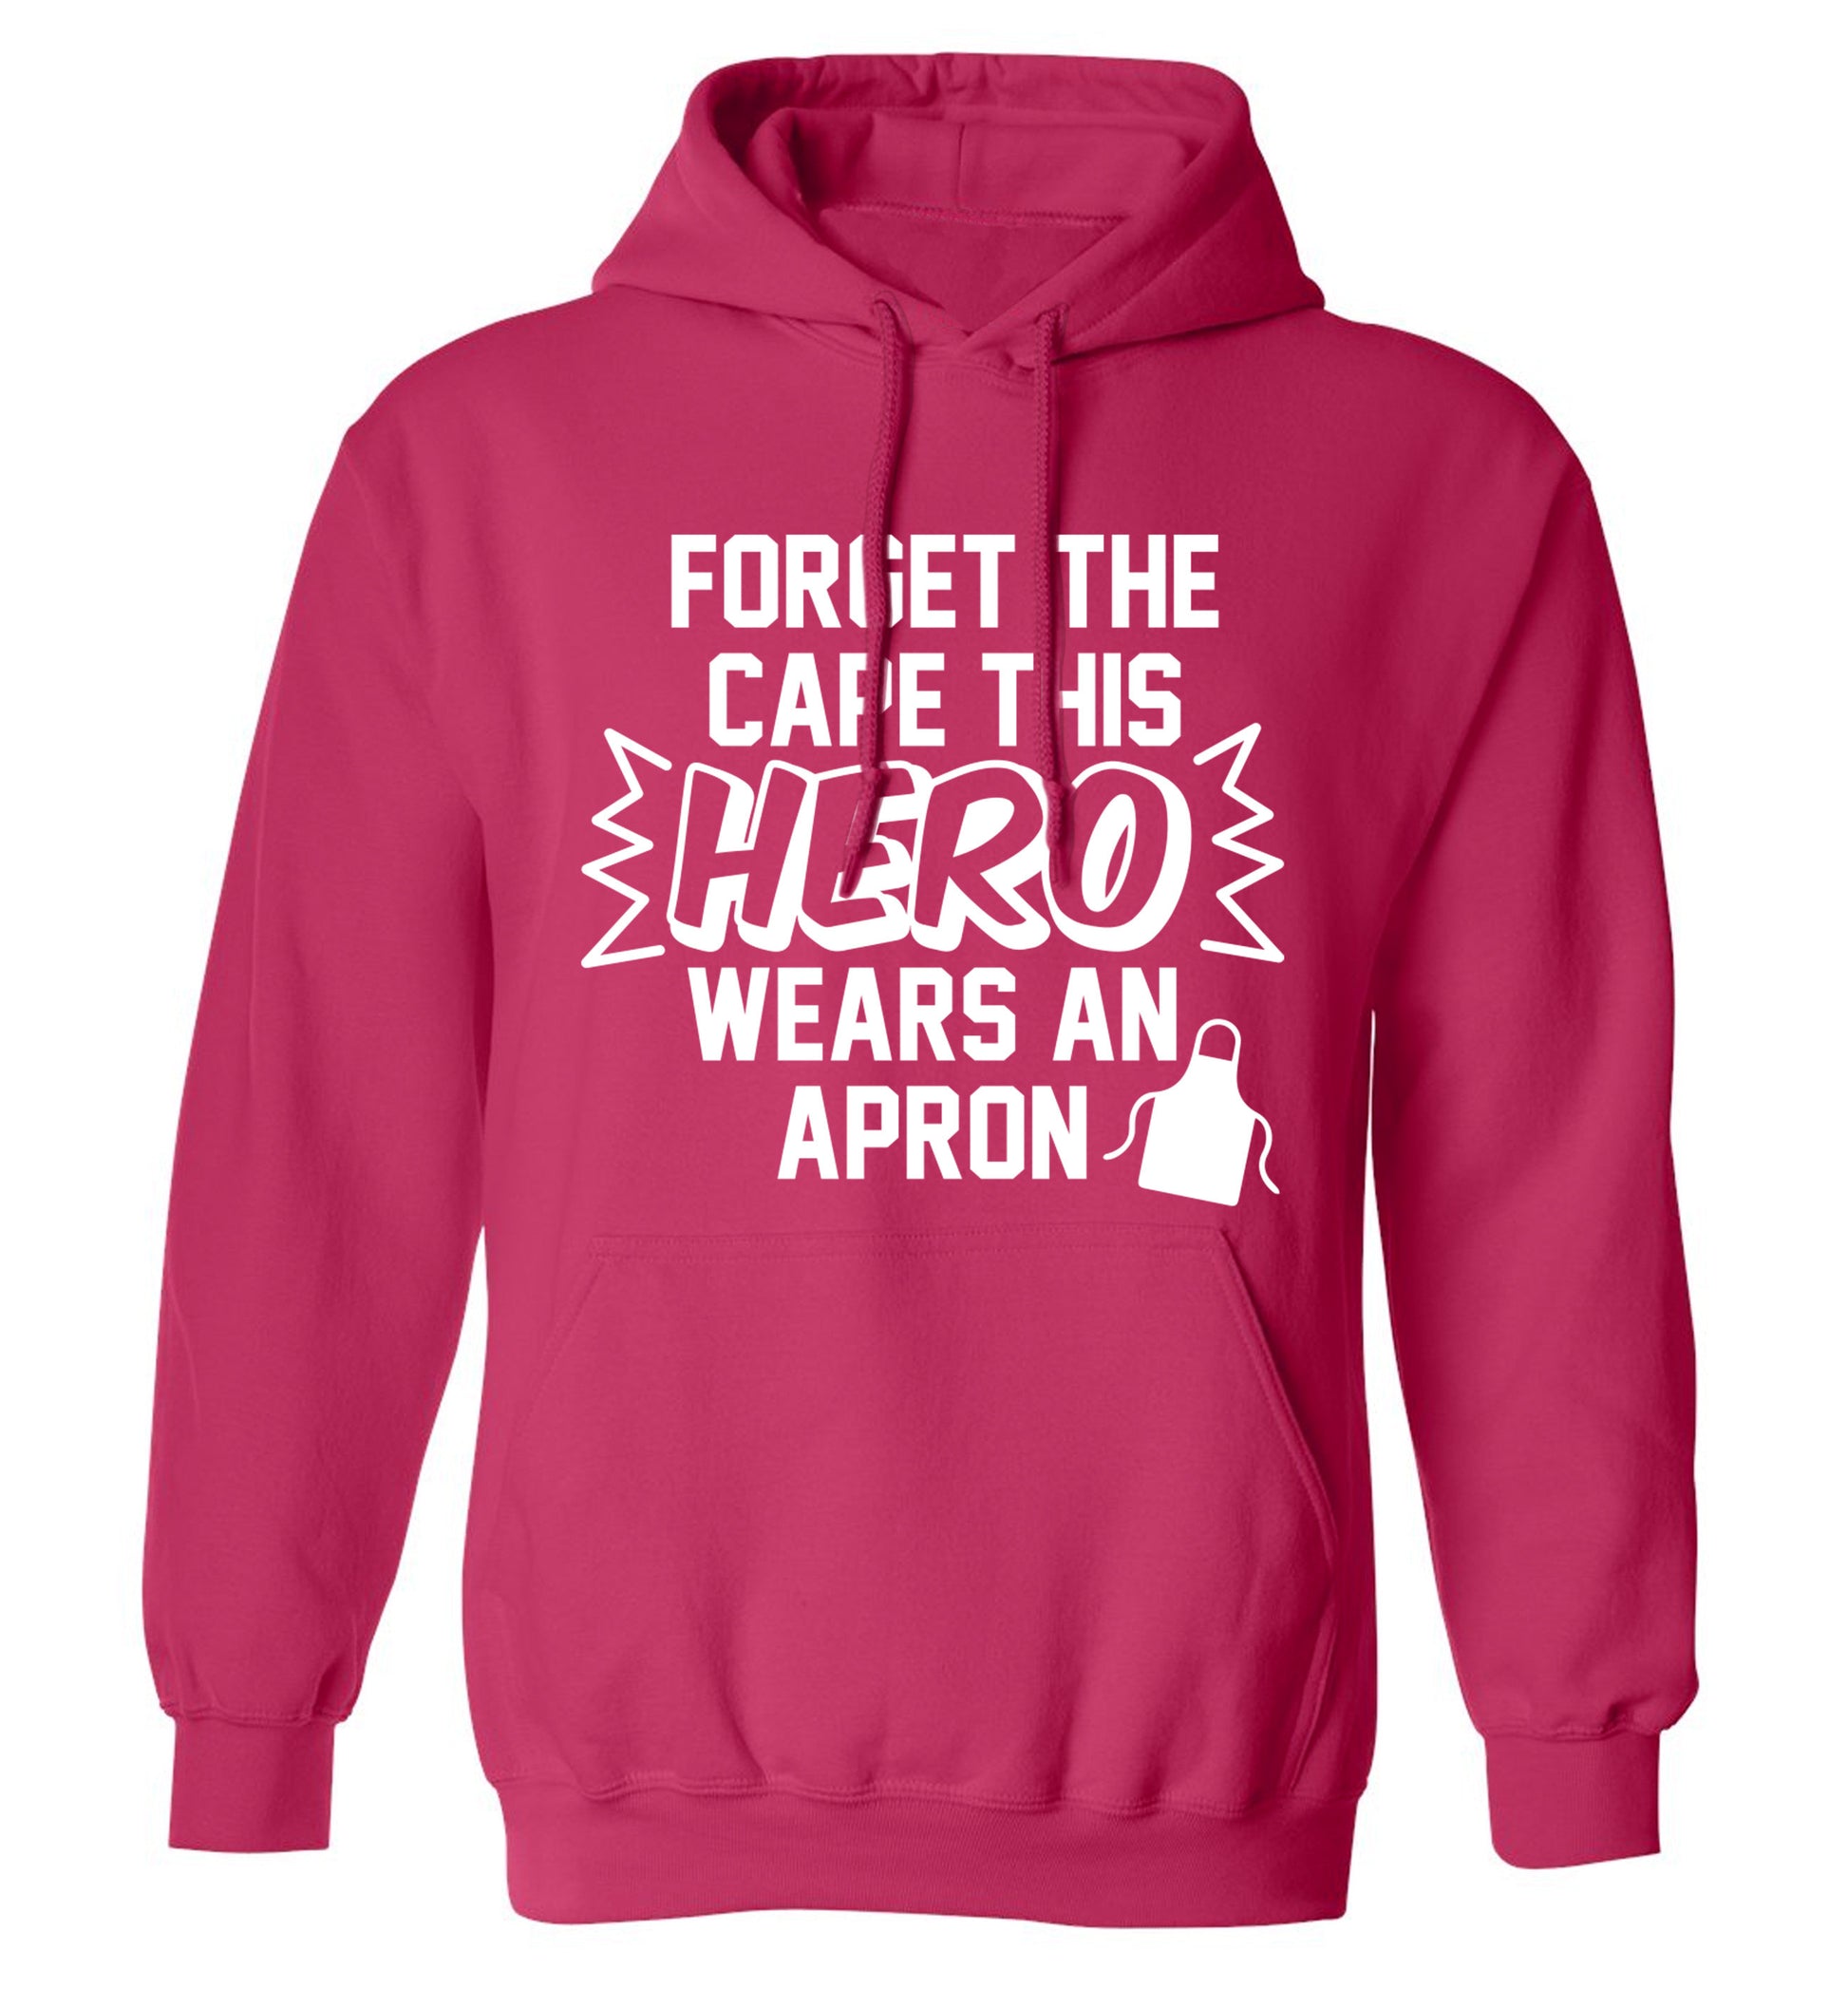 Forget the cape this hero wears an apron adults unisex pink hoodie 2XL